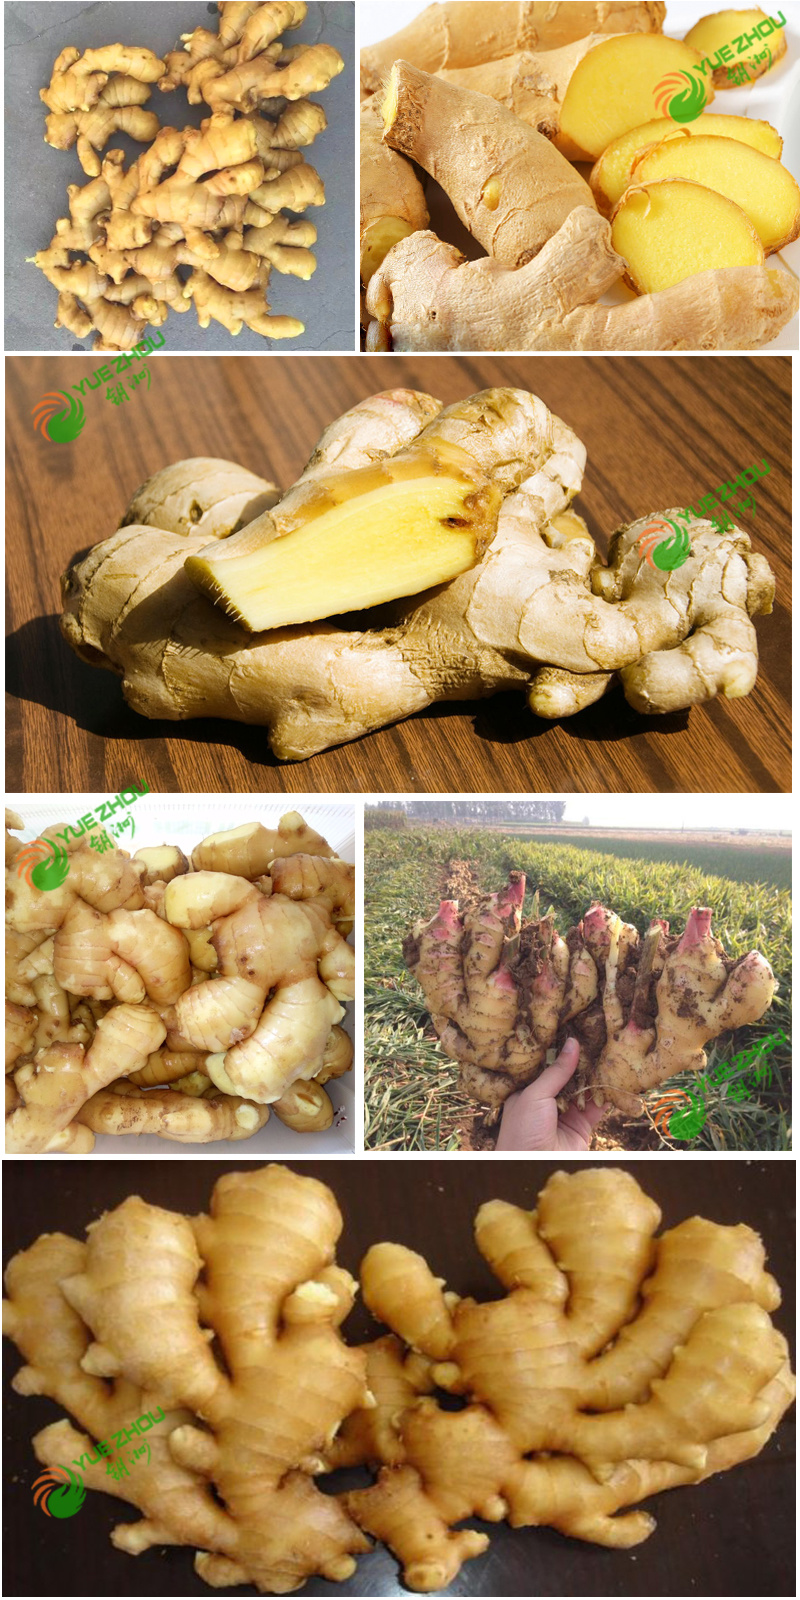 2018 Fresh Ginger New Crop Ginger with Cheap Price From China